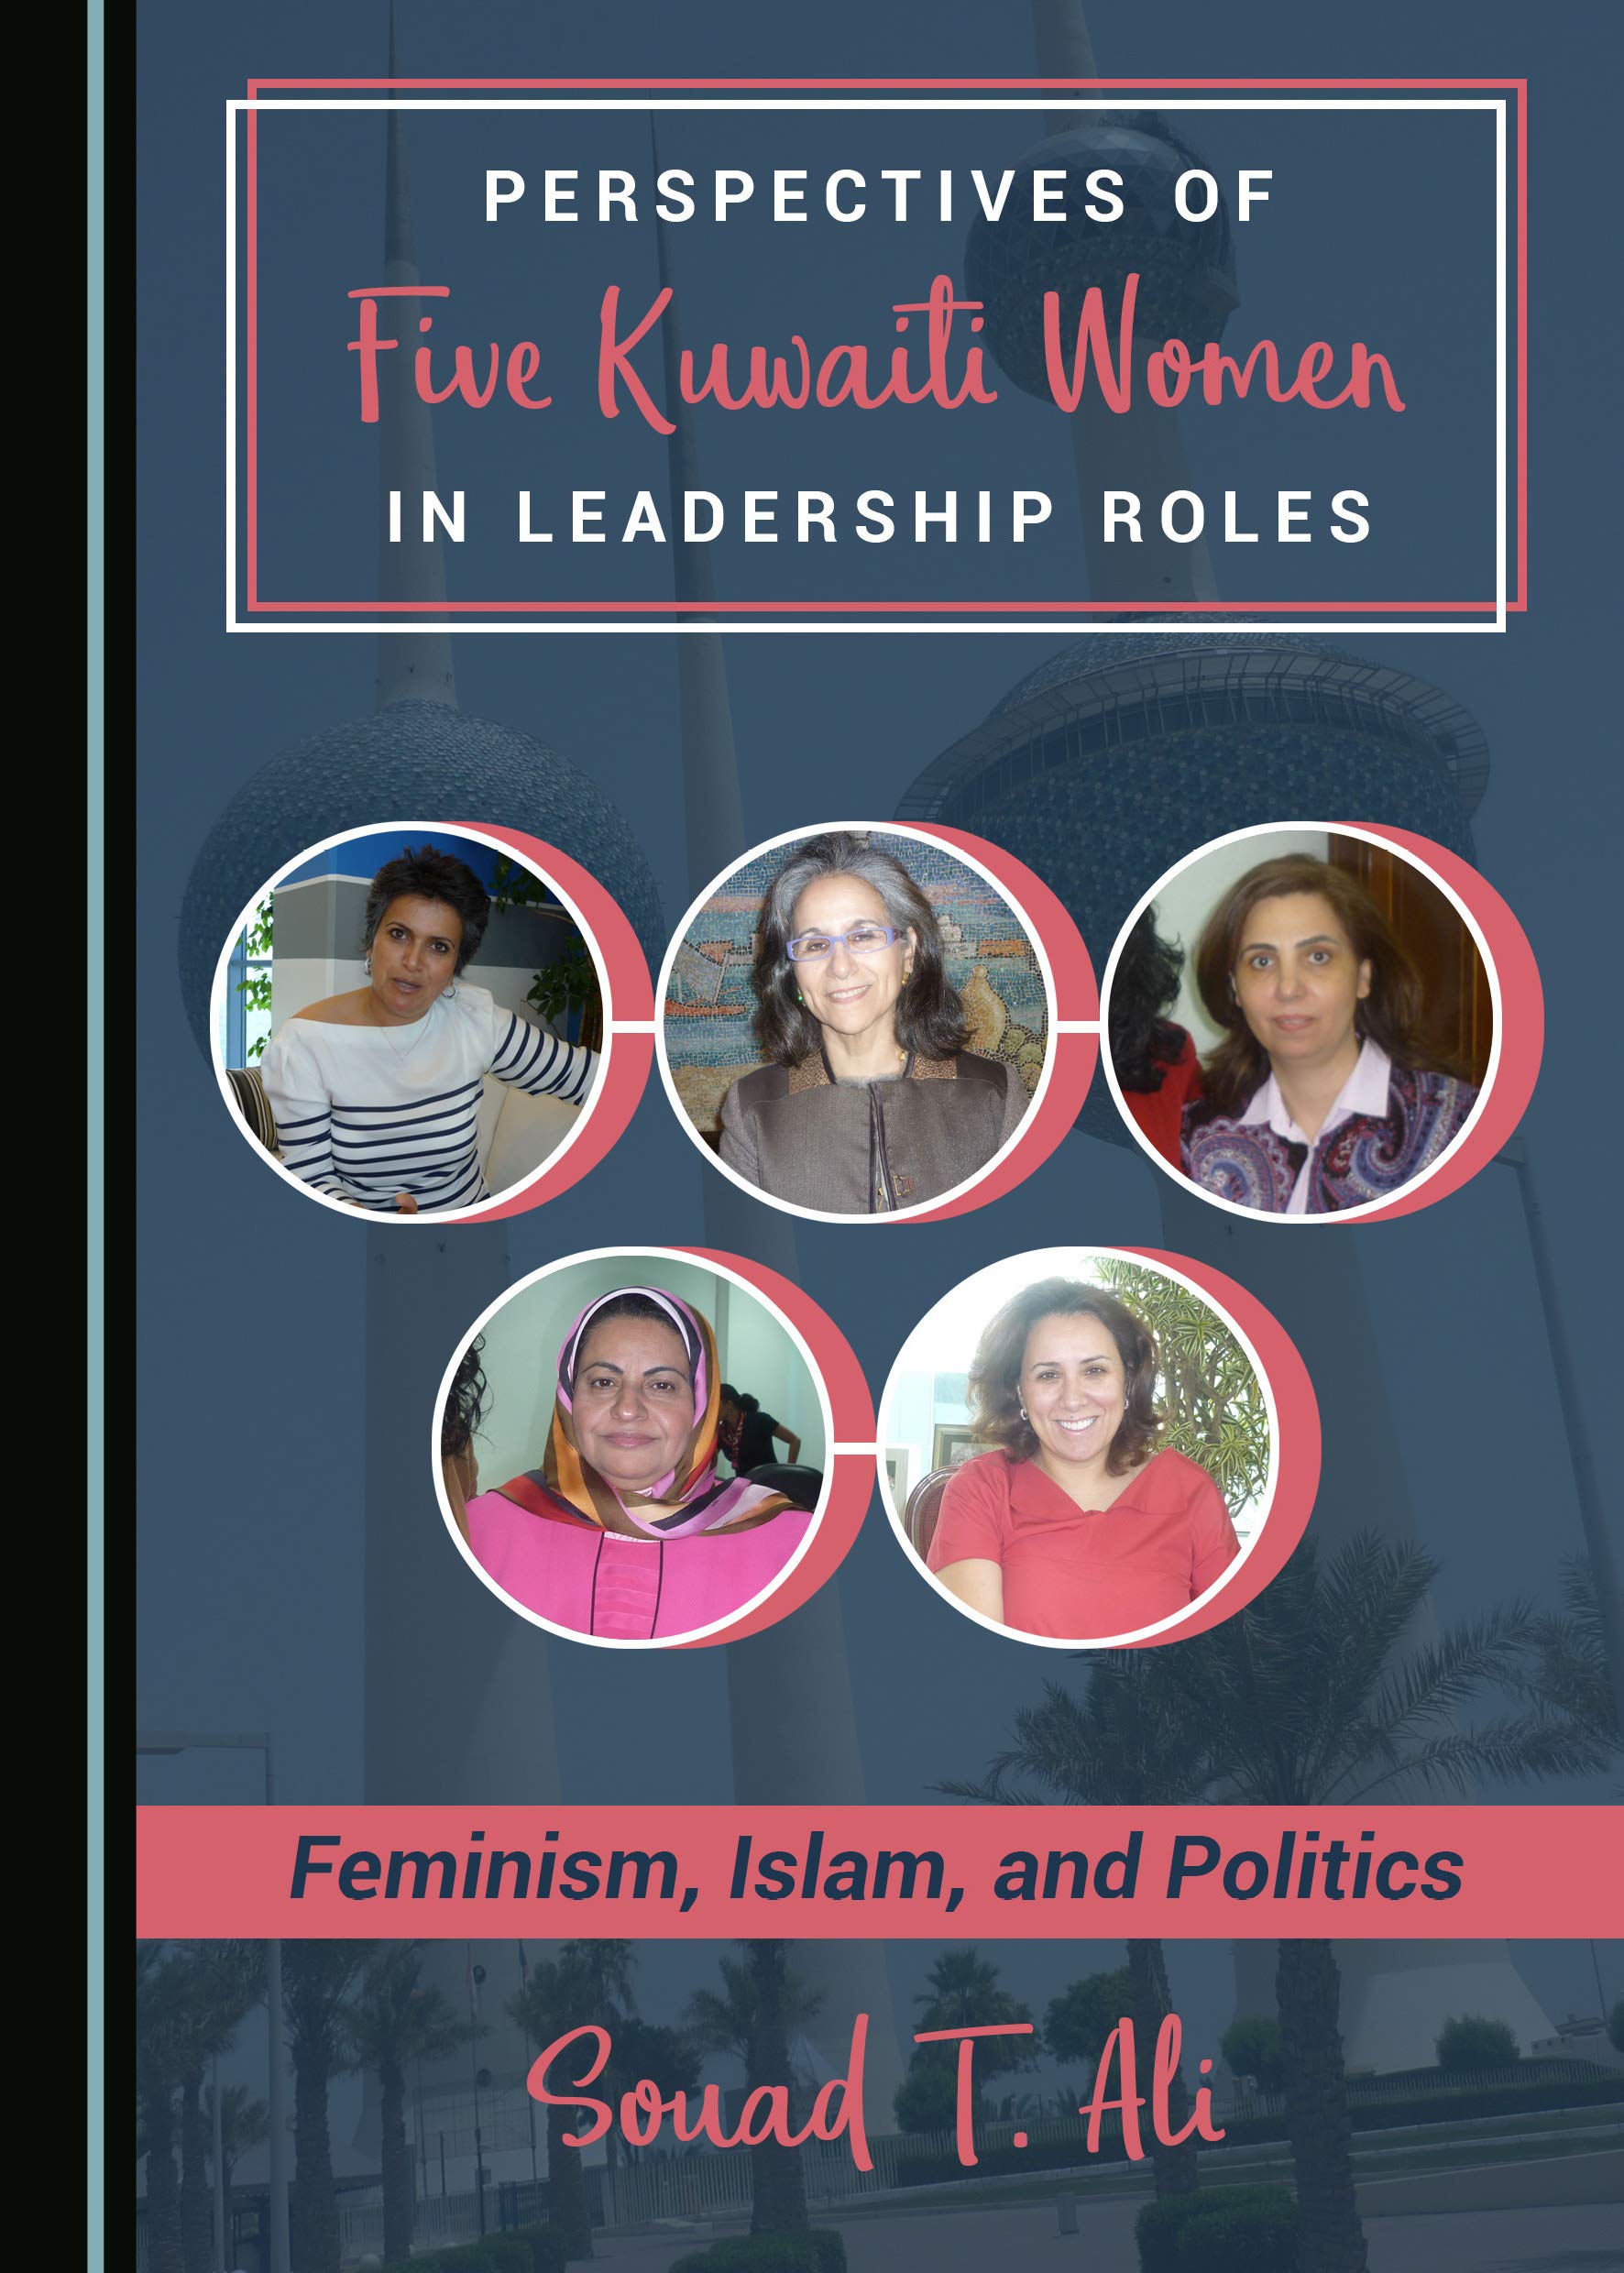 Cover of Perspectives of Five Kuwaiti Women in Leadership Roles by Souad T. Ali